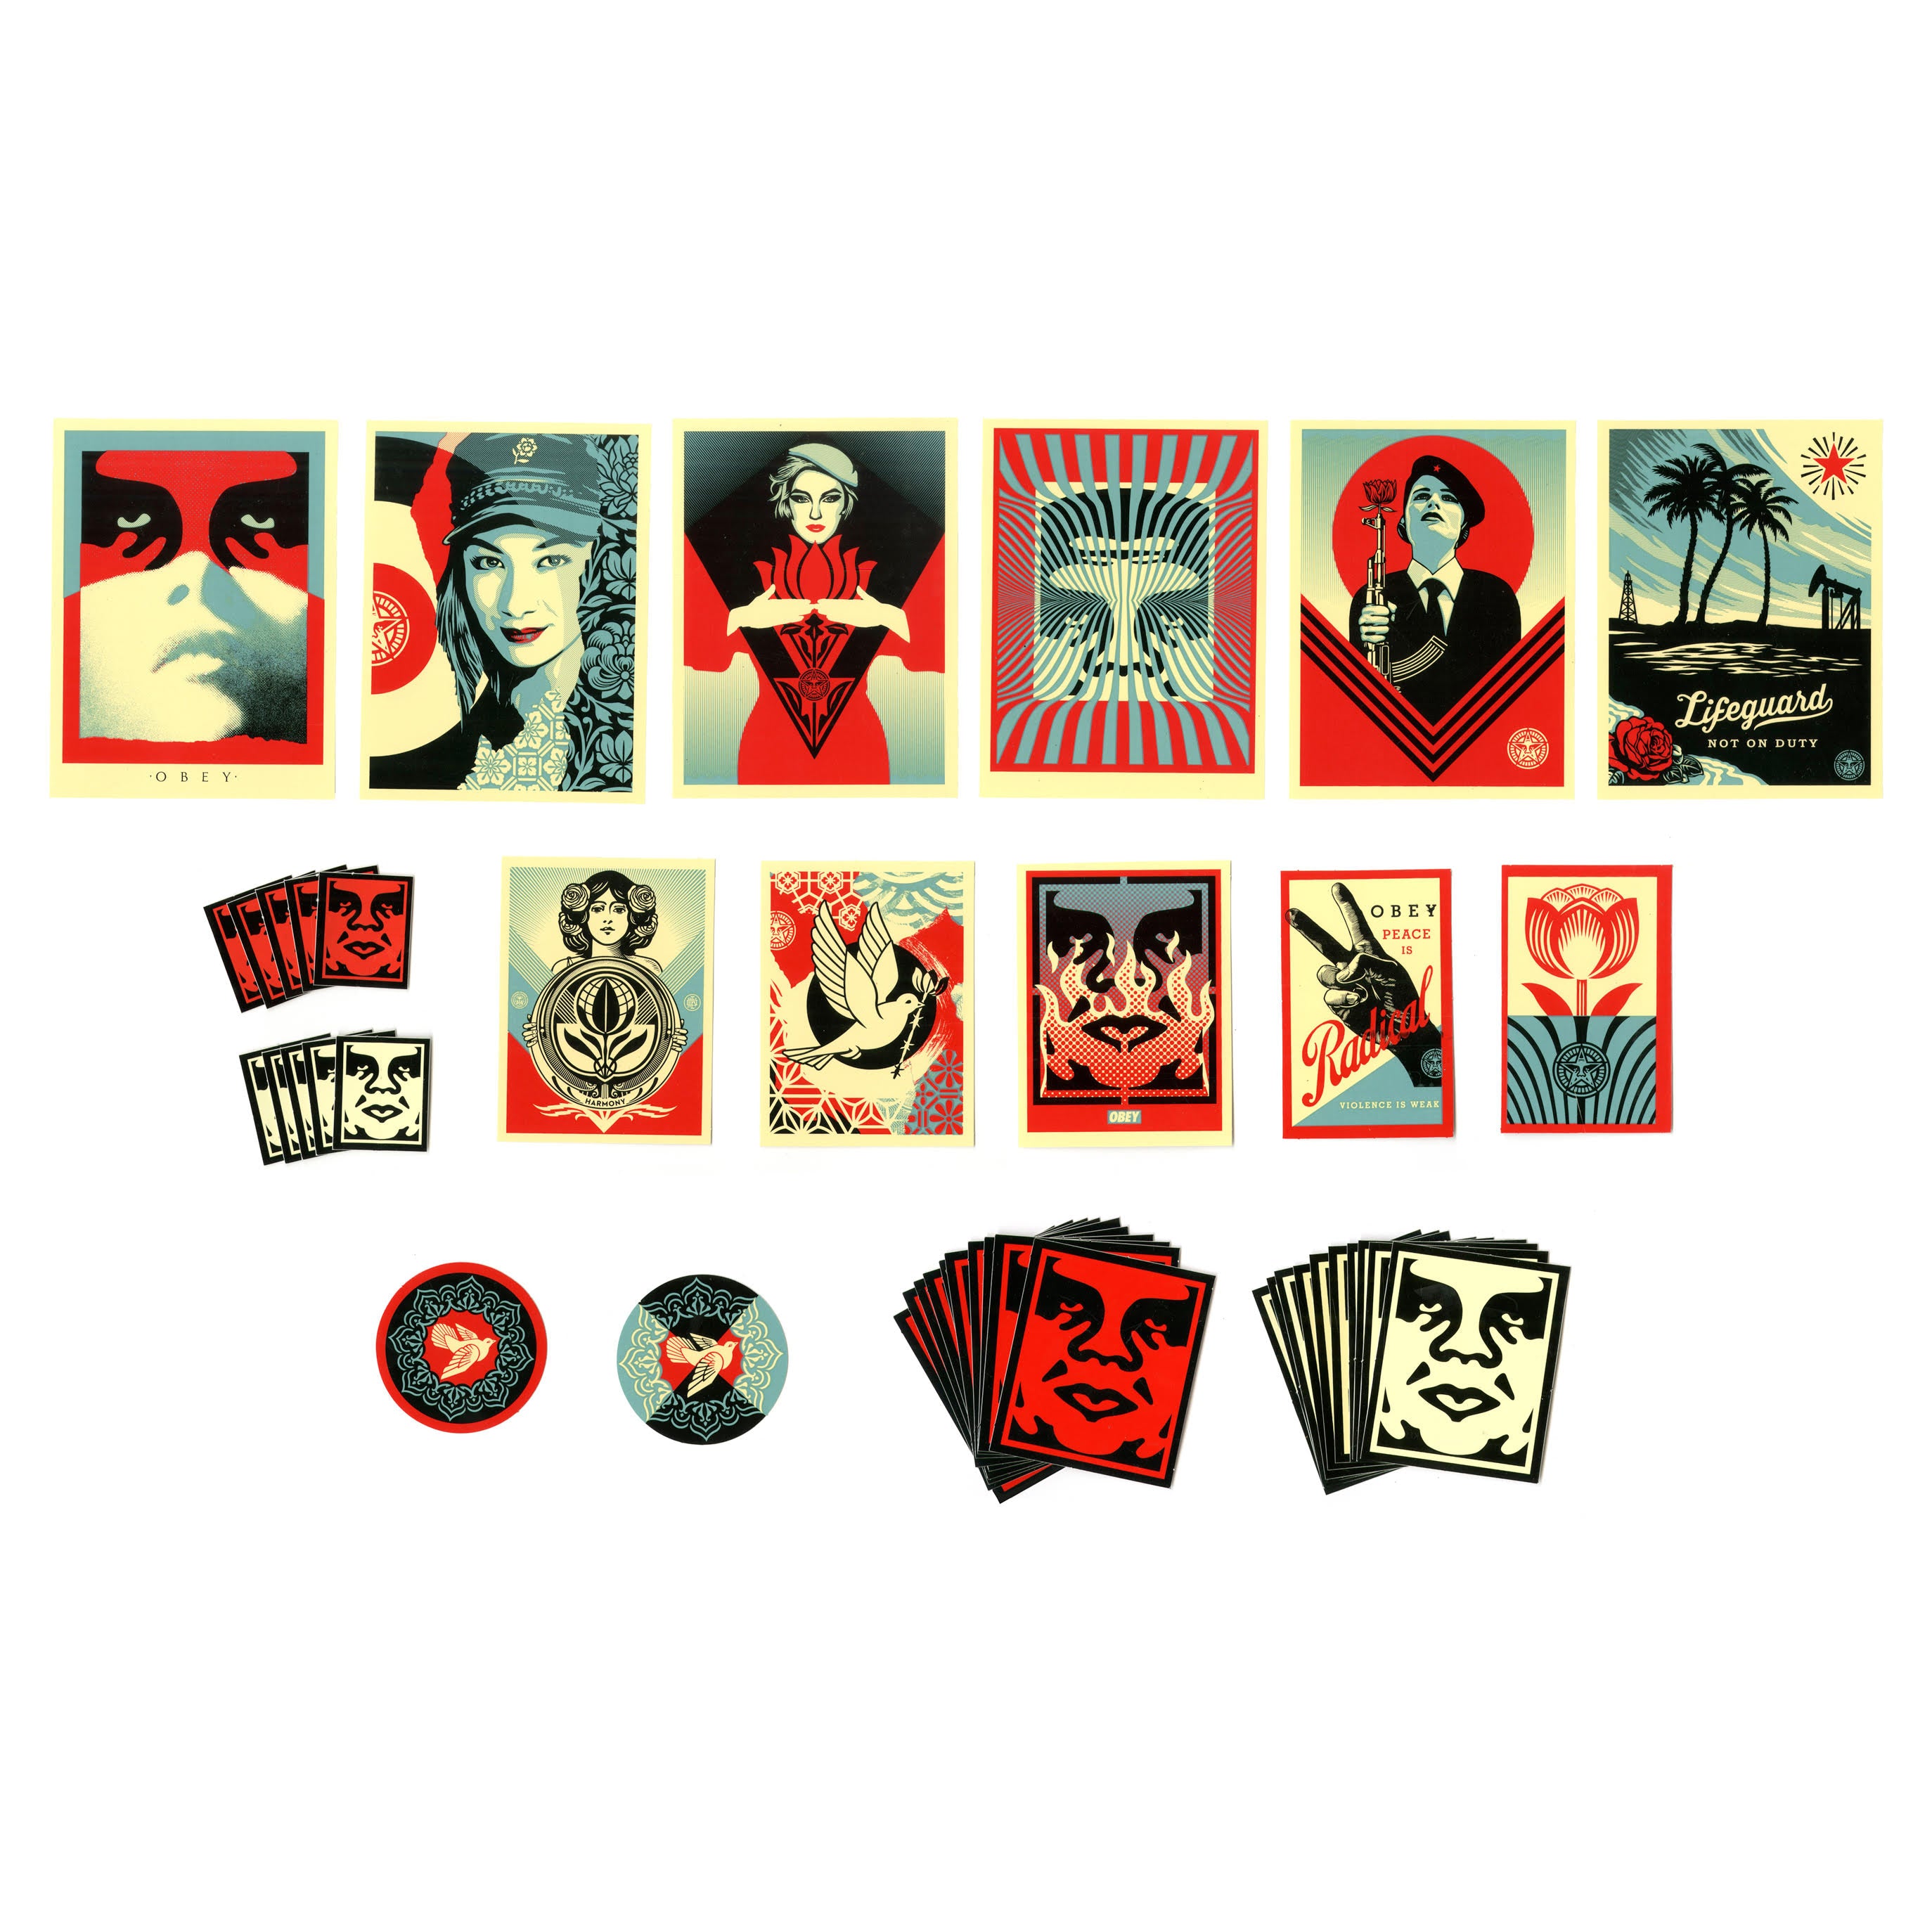 The Official Store of OBEY GIANT - Limited Edition Art & Wall Art 